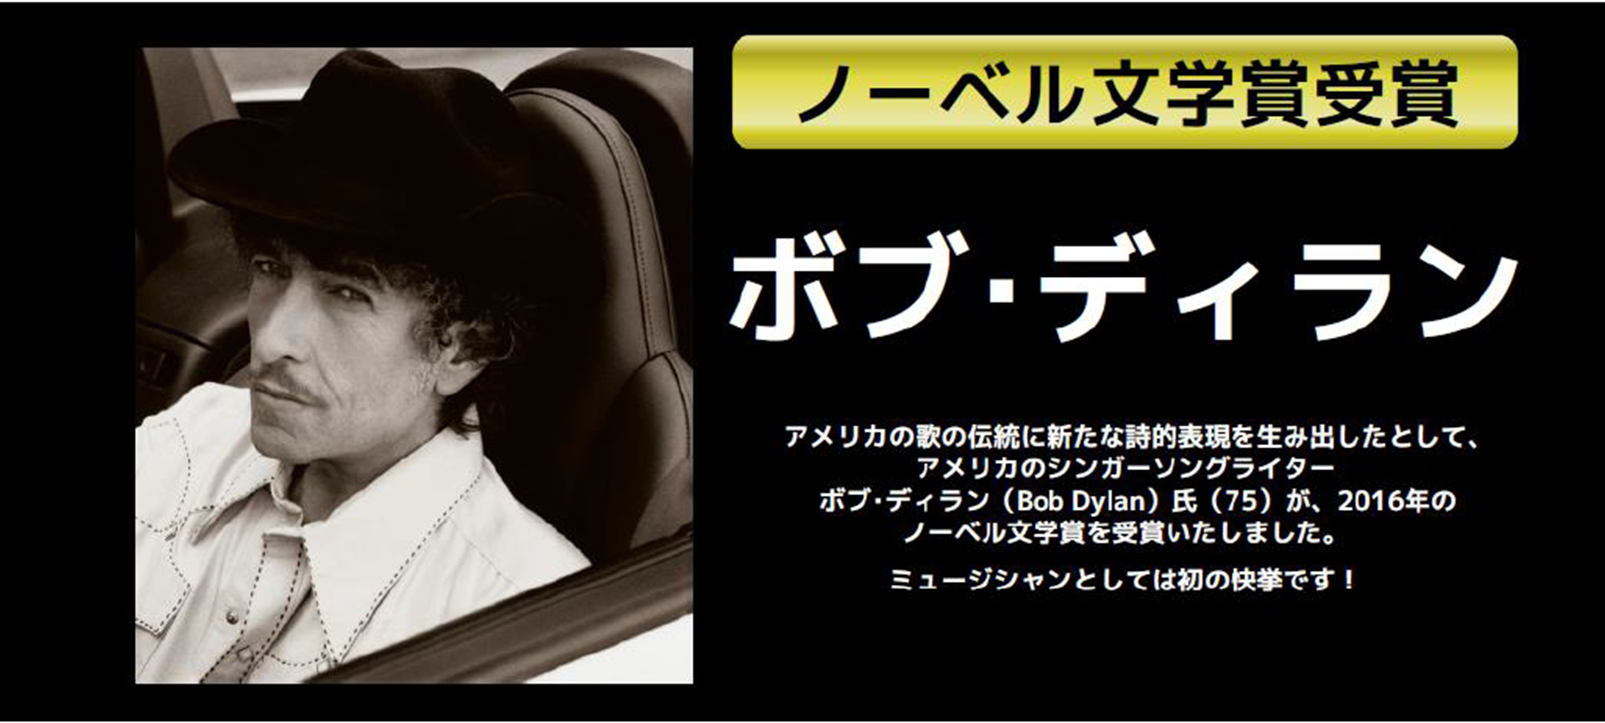 http://www.ccc.co.jp/news/img/201610108_bobdylan_01.png